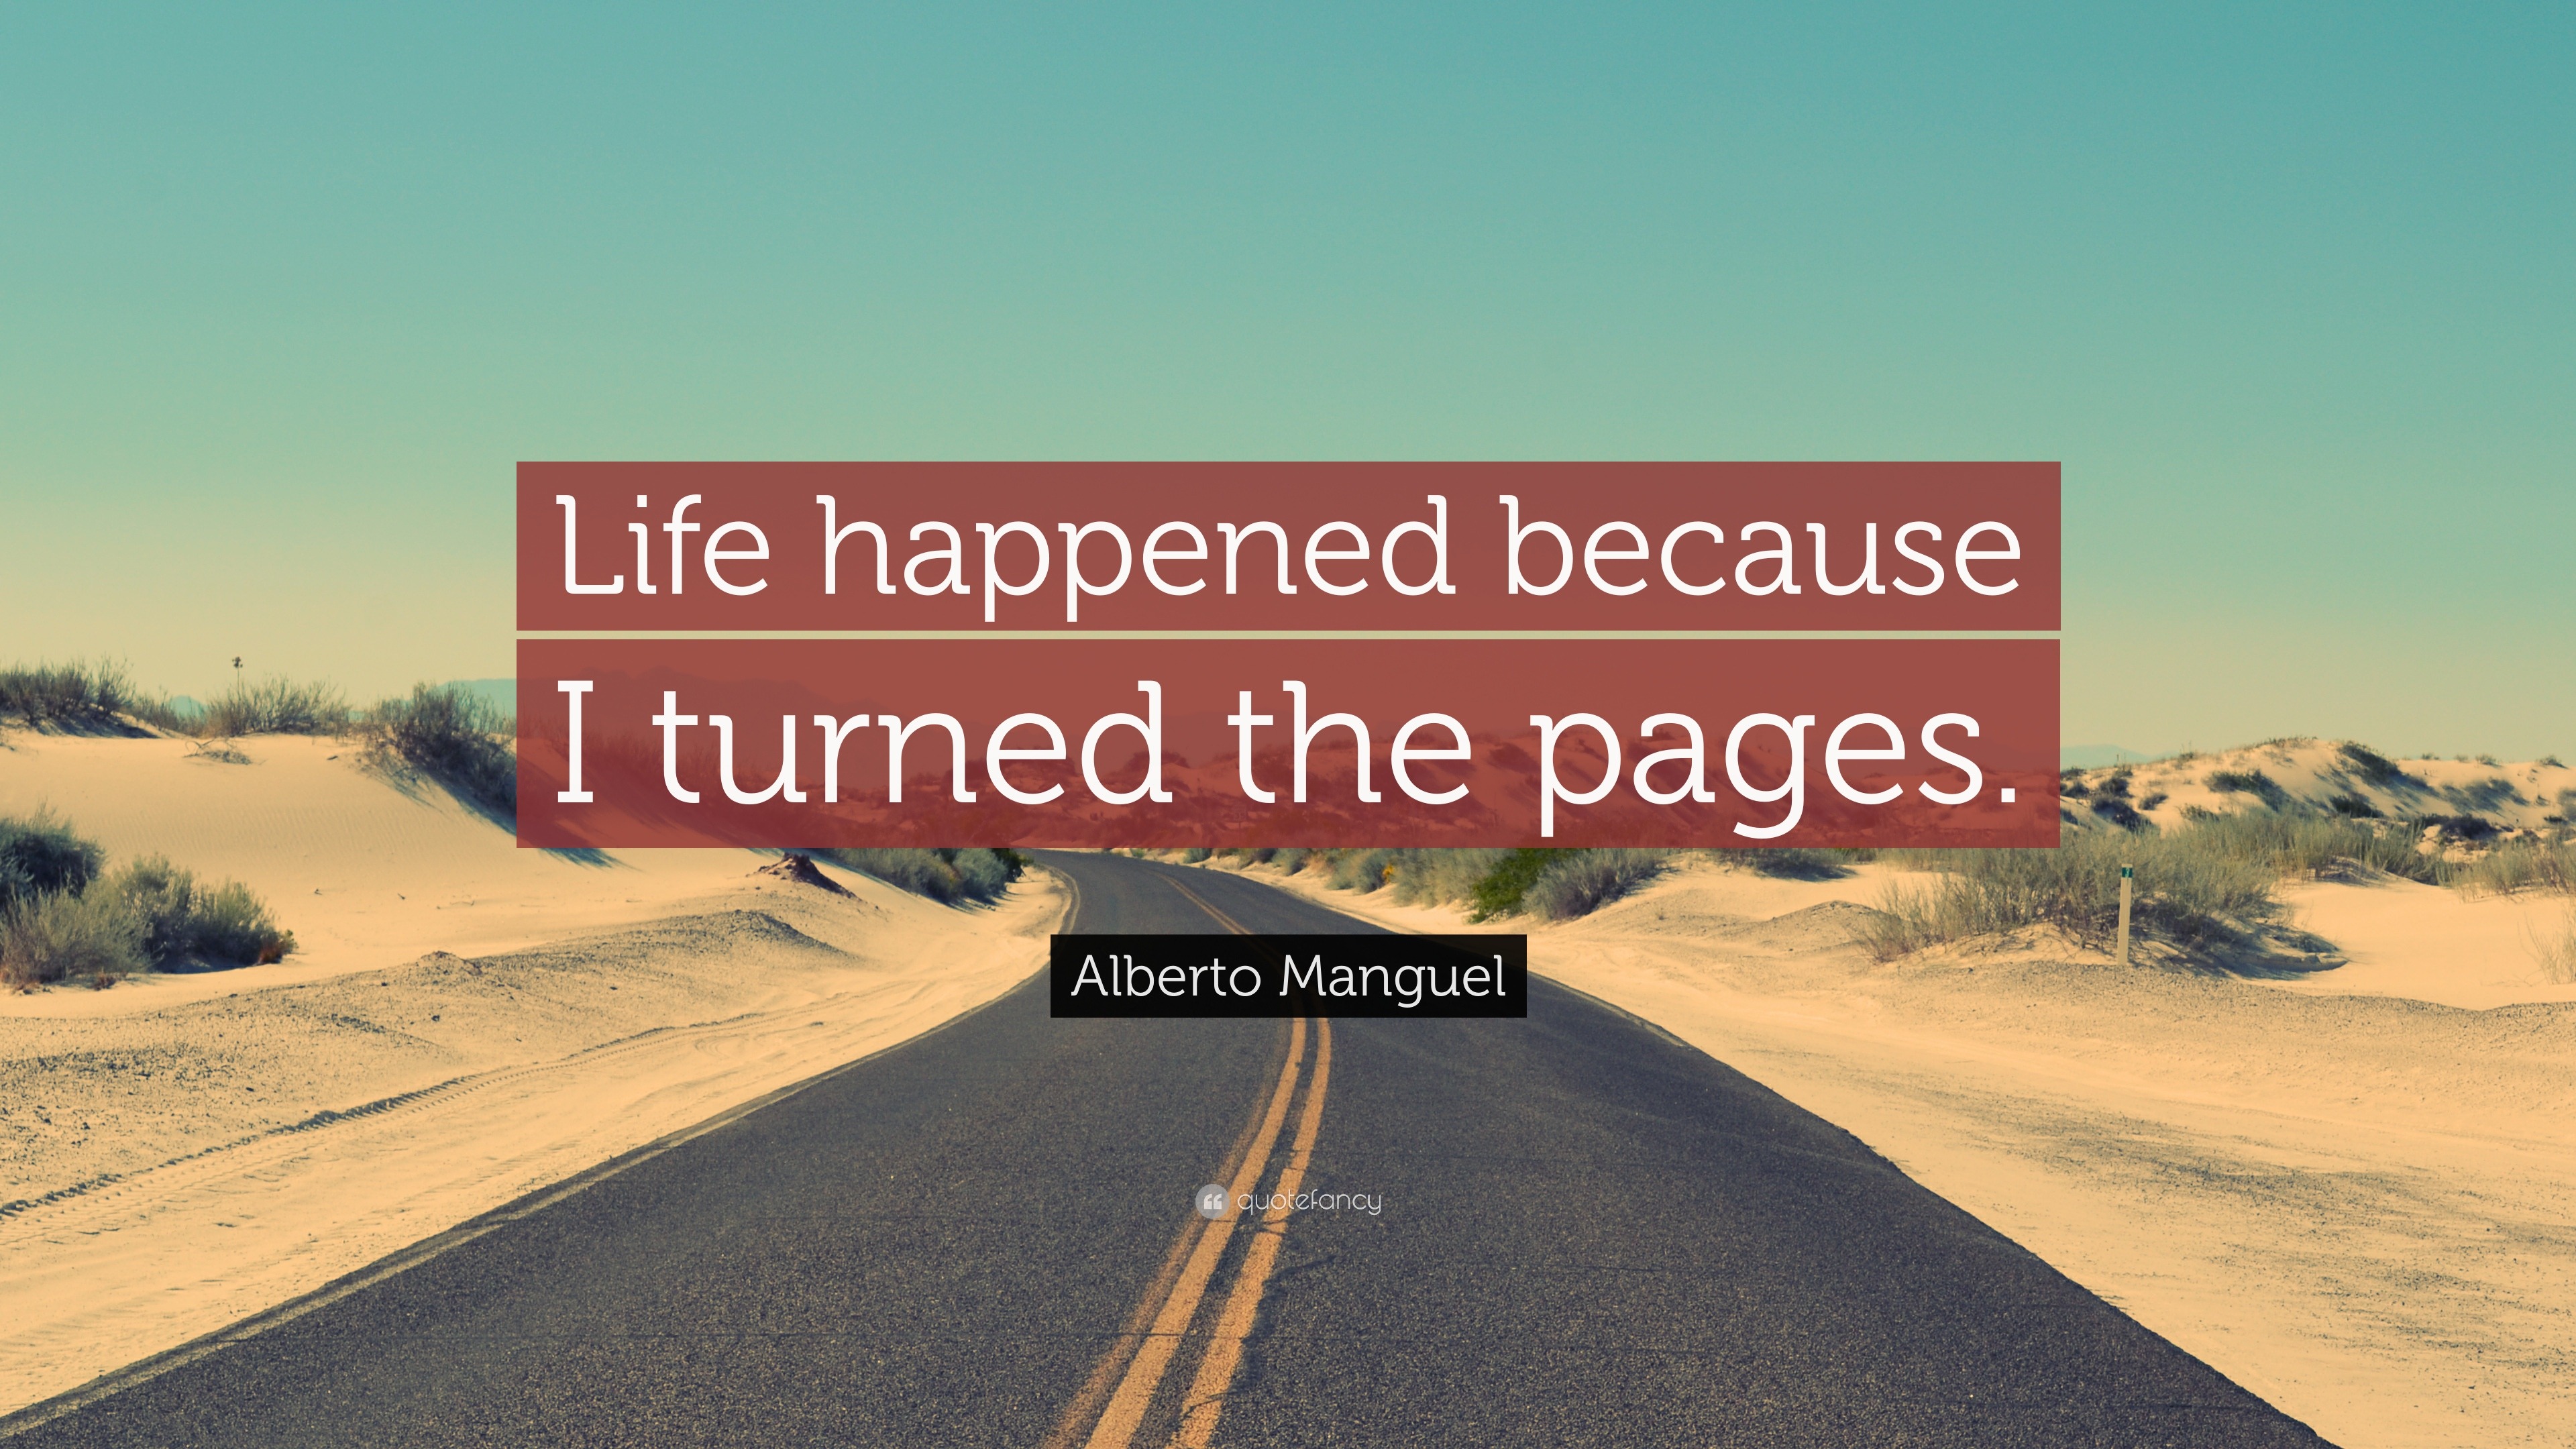 life happened because i turned th epages